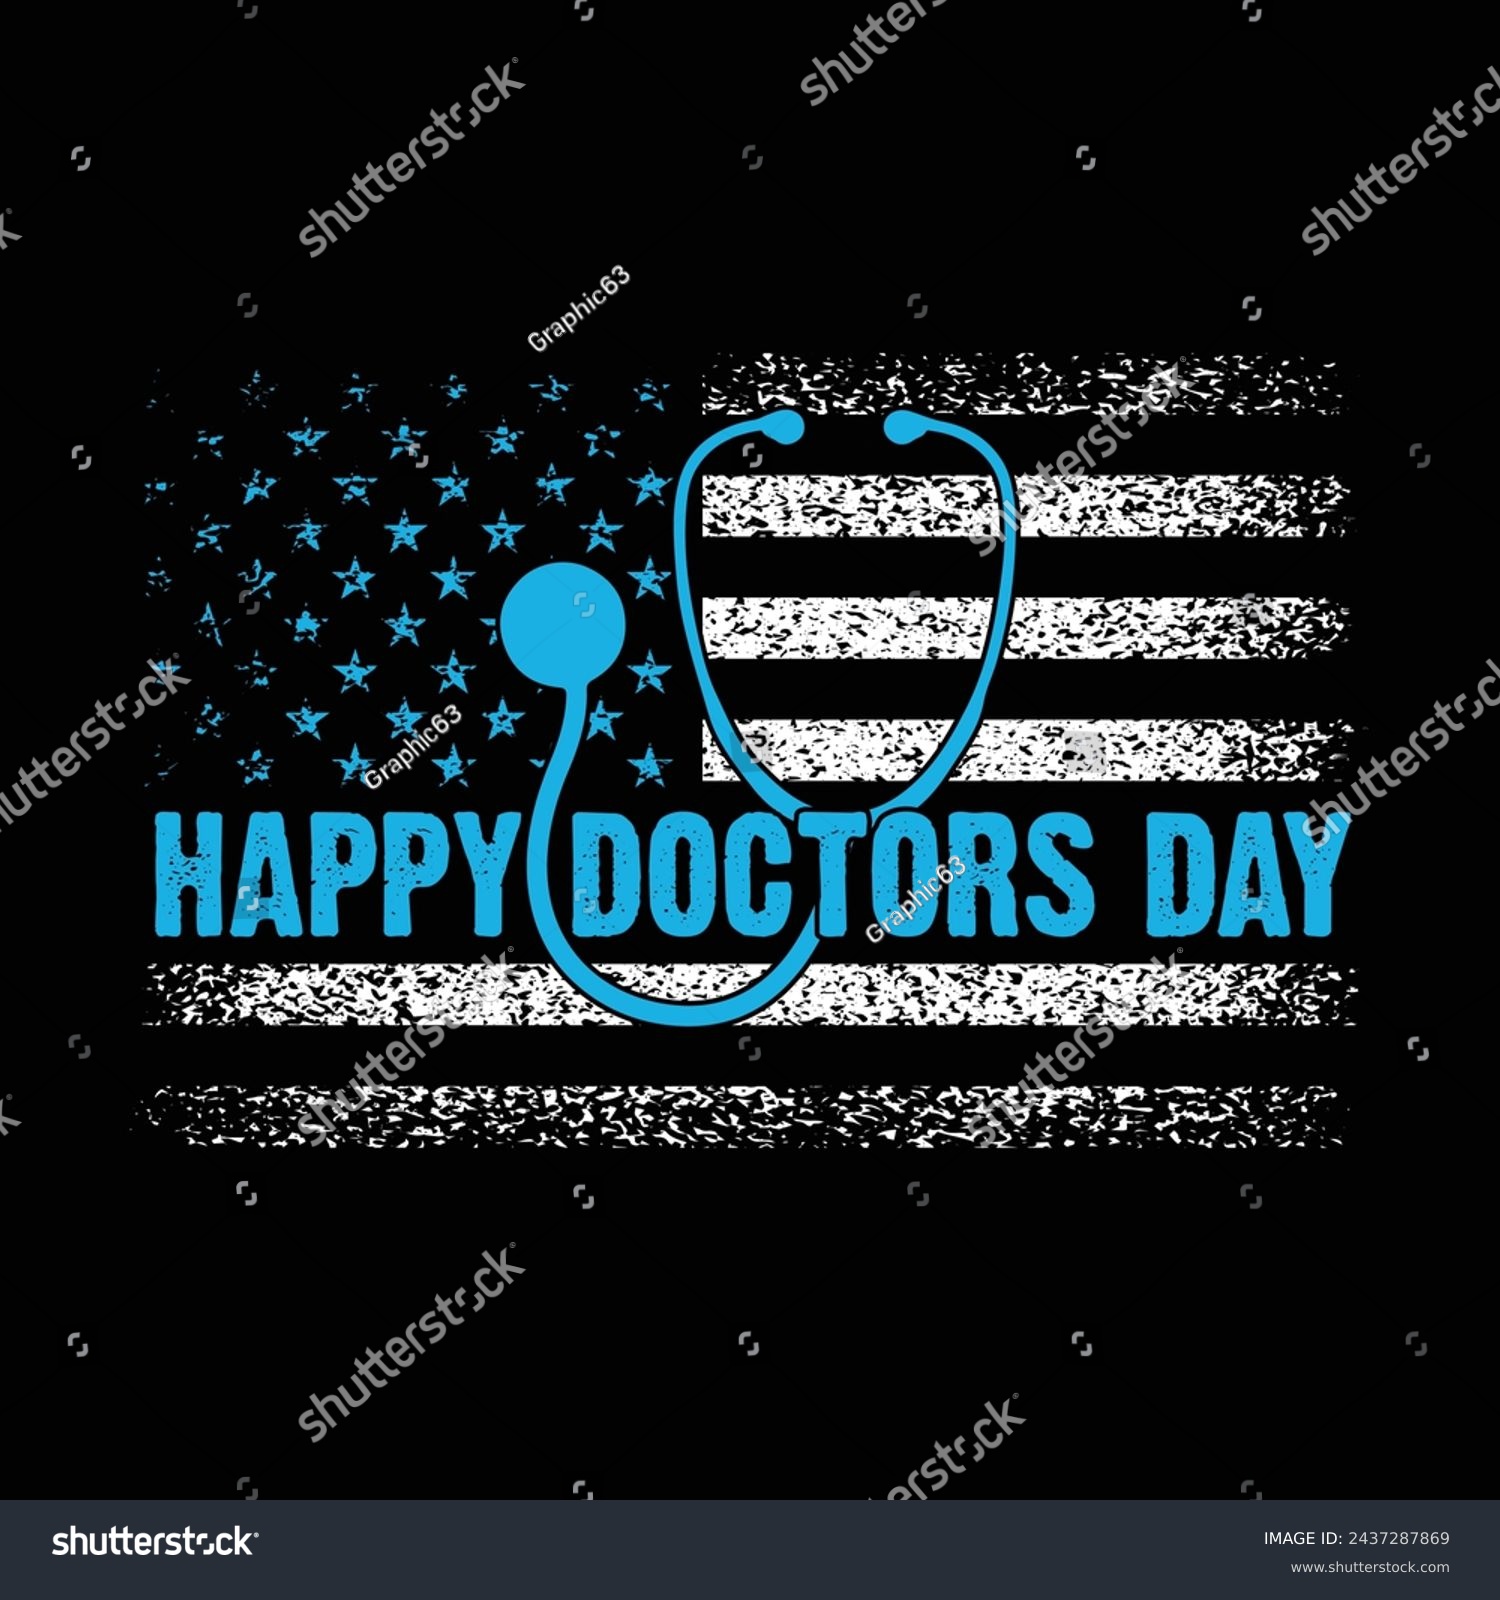 SVG of American Distressed Flag.Happy Doctors Day Motivational Typography Quotes Design Vector t shirt,poster,banner,backround. svg